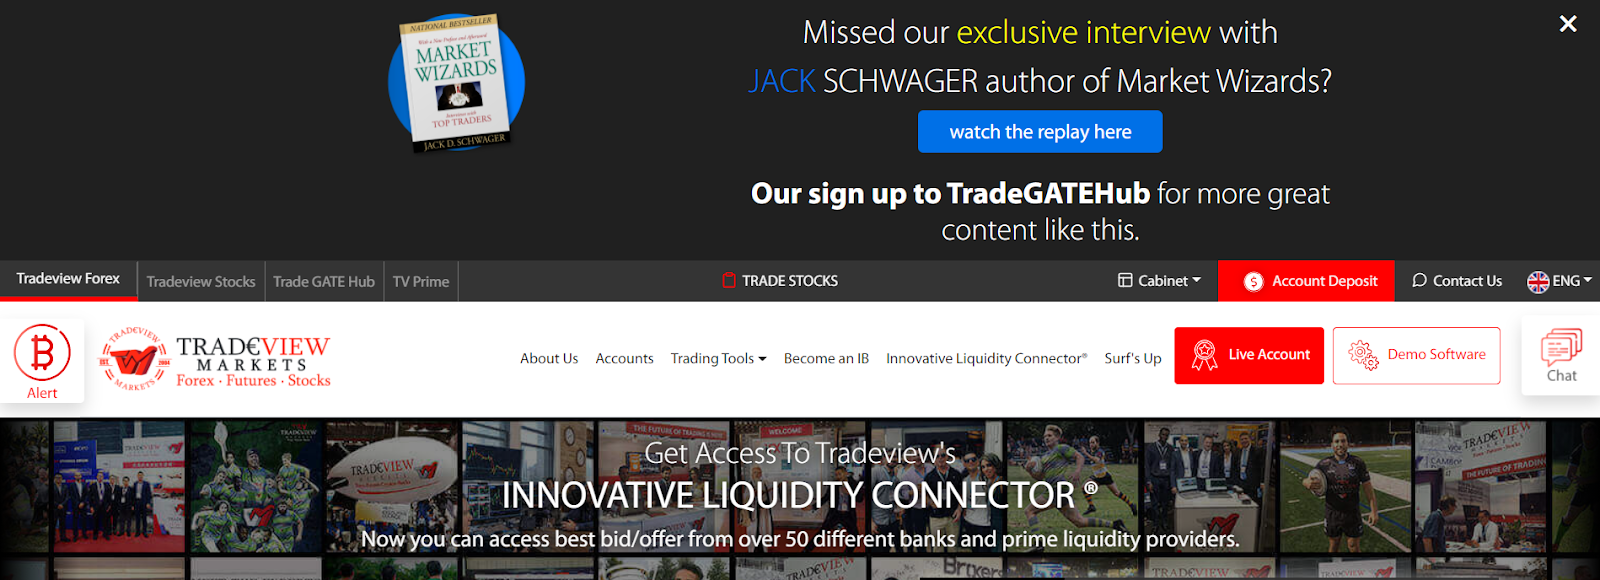 Tradeview Markets Review - Live account